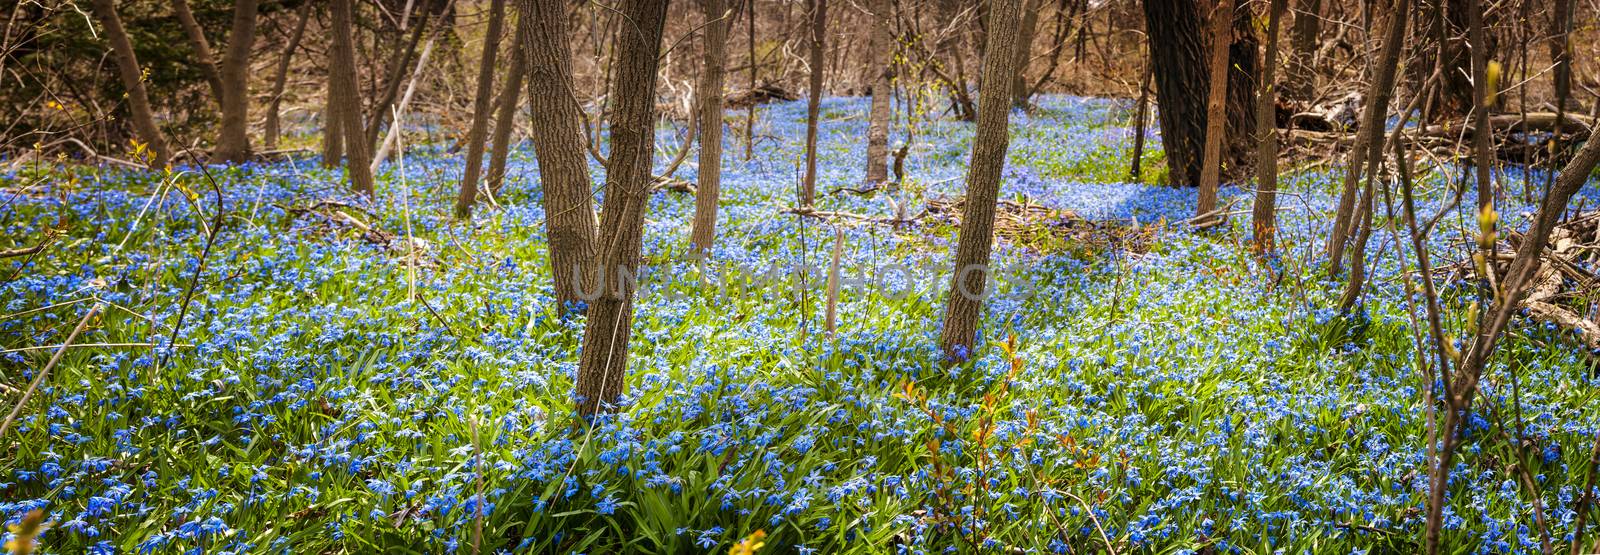 Panorama of early spring blue flowers glory-of-the-snow blooming in abundance on forest floor. Ontario, Canada.